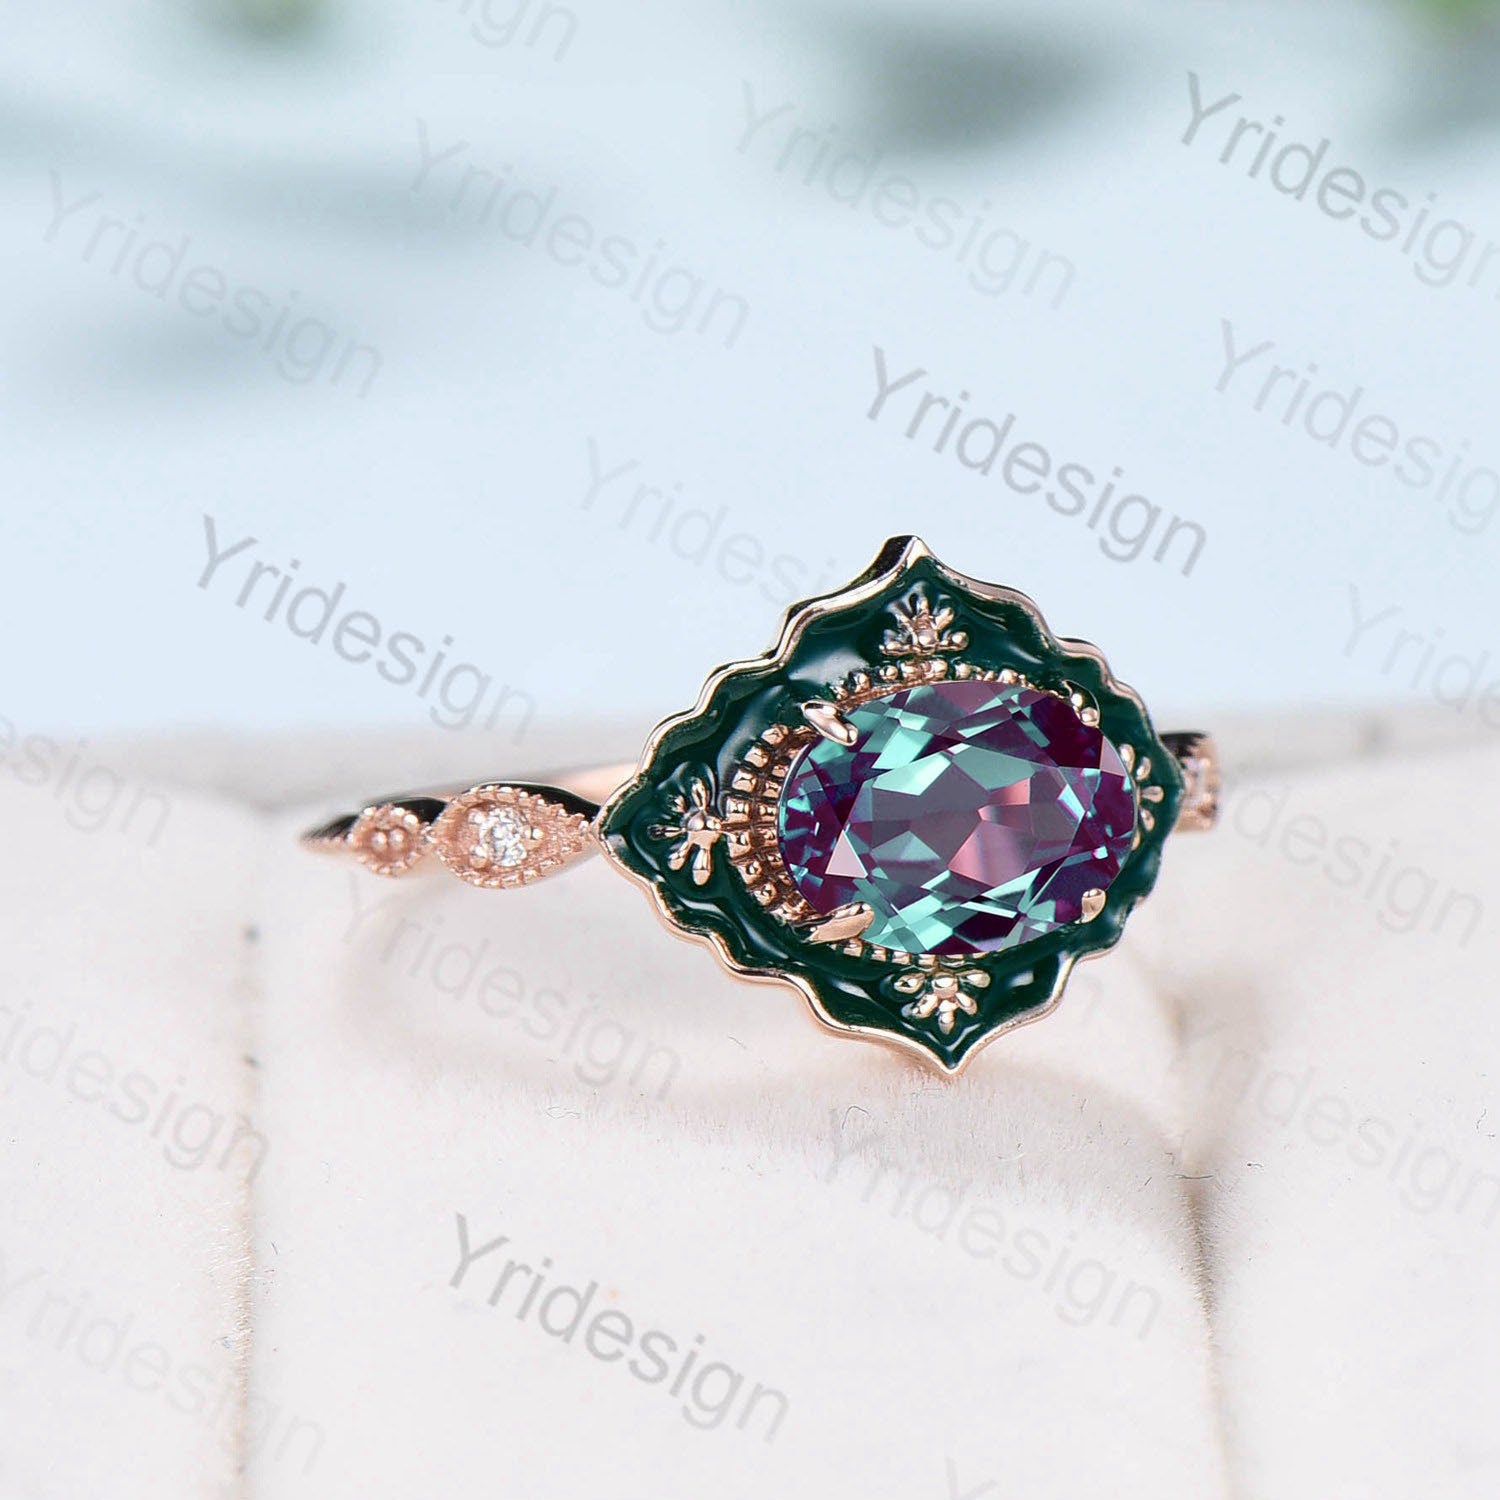 Buy Vintage Alexandrite Ring Gold Silver Emerald Cut Alexandrite Engagement  Ring Flower Marquise Moissanite Ring for Women Anniversary Gifts Online in  India - Etsy